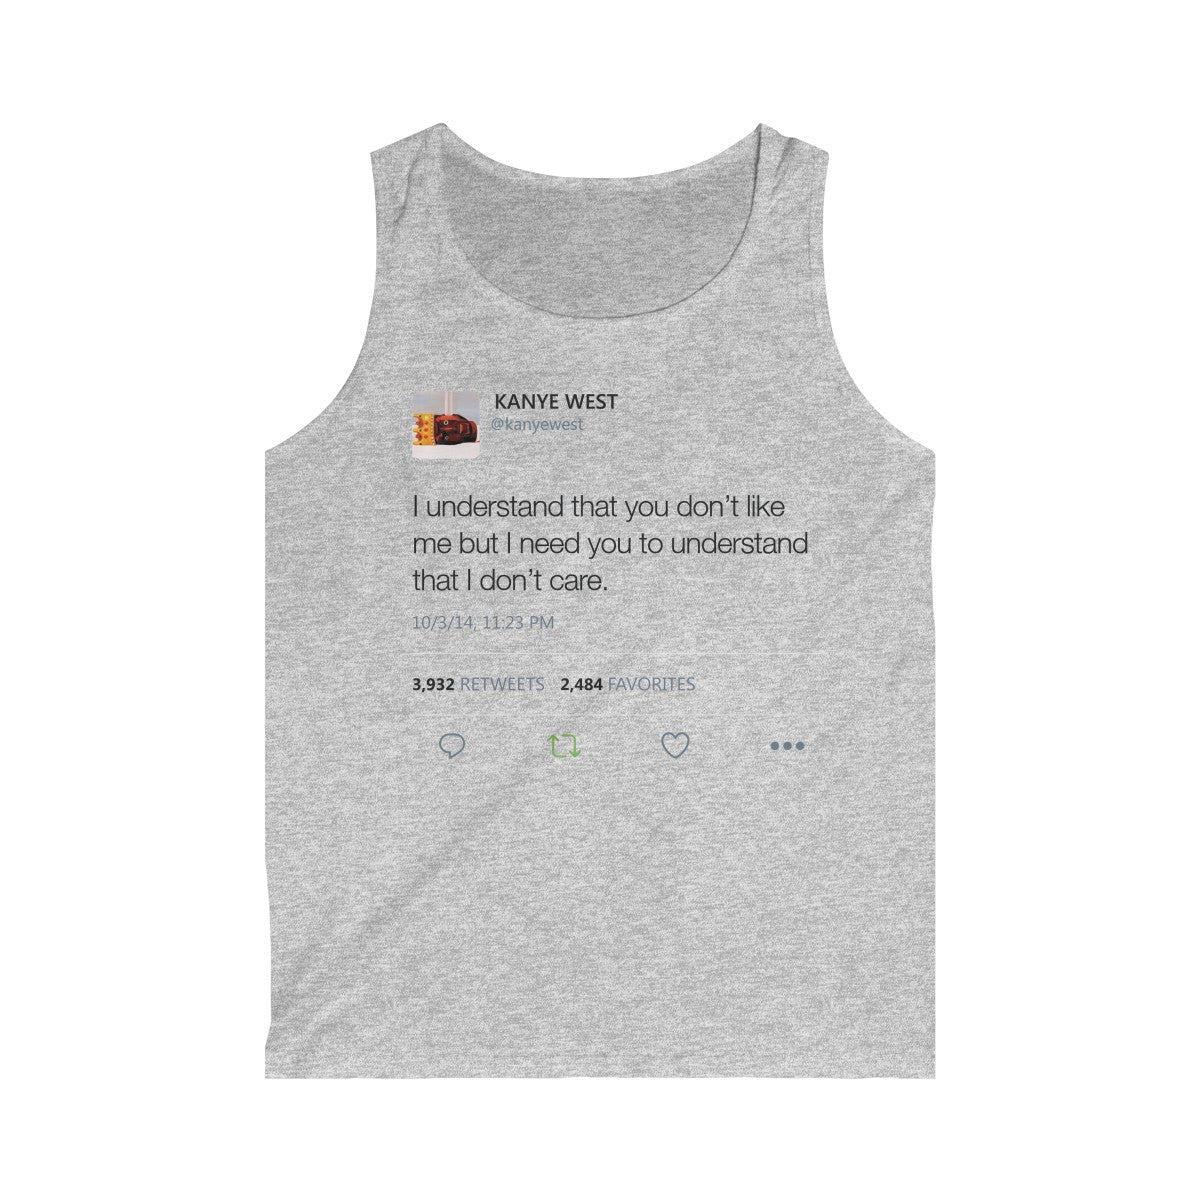 I Understand That You Don't Like Me But I Need You To Understand That I Dont Care Kanye West Tweet Men's Tank Top-Sport Grey-L-Archethype